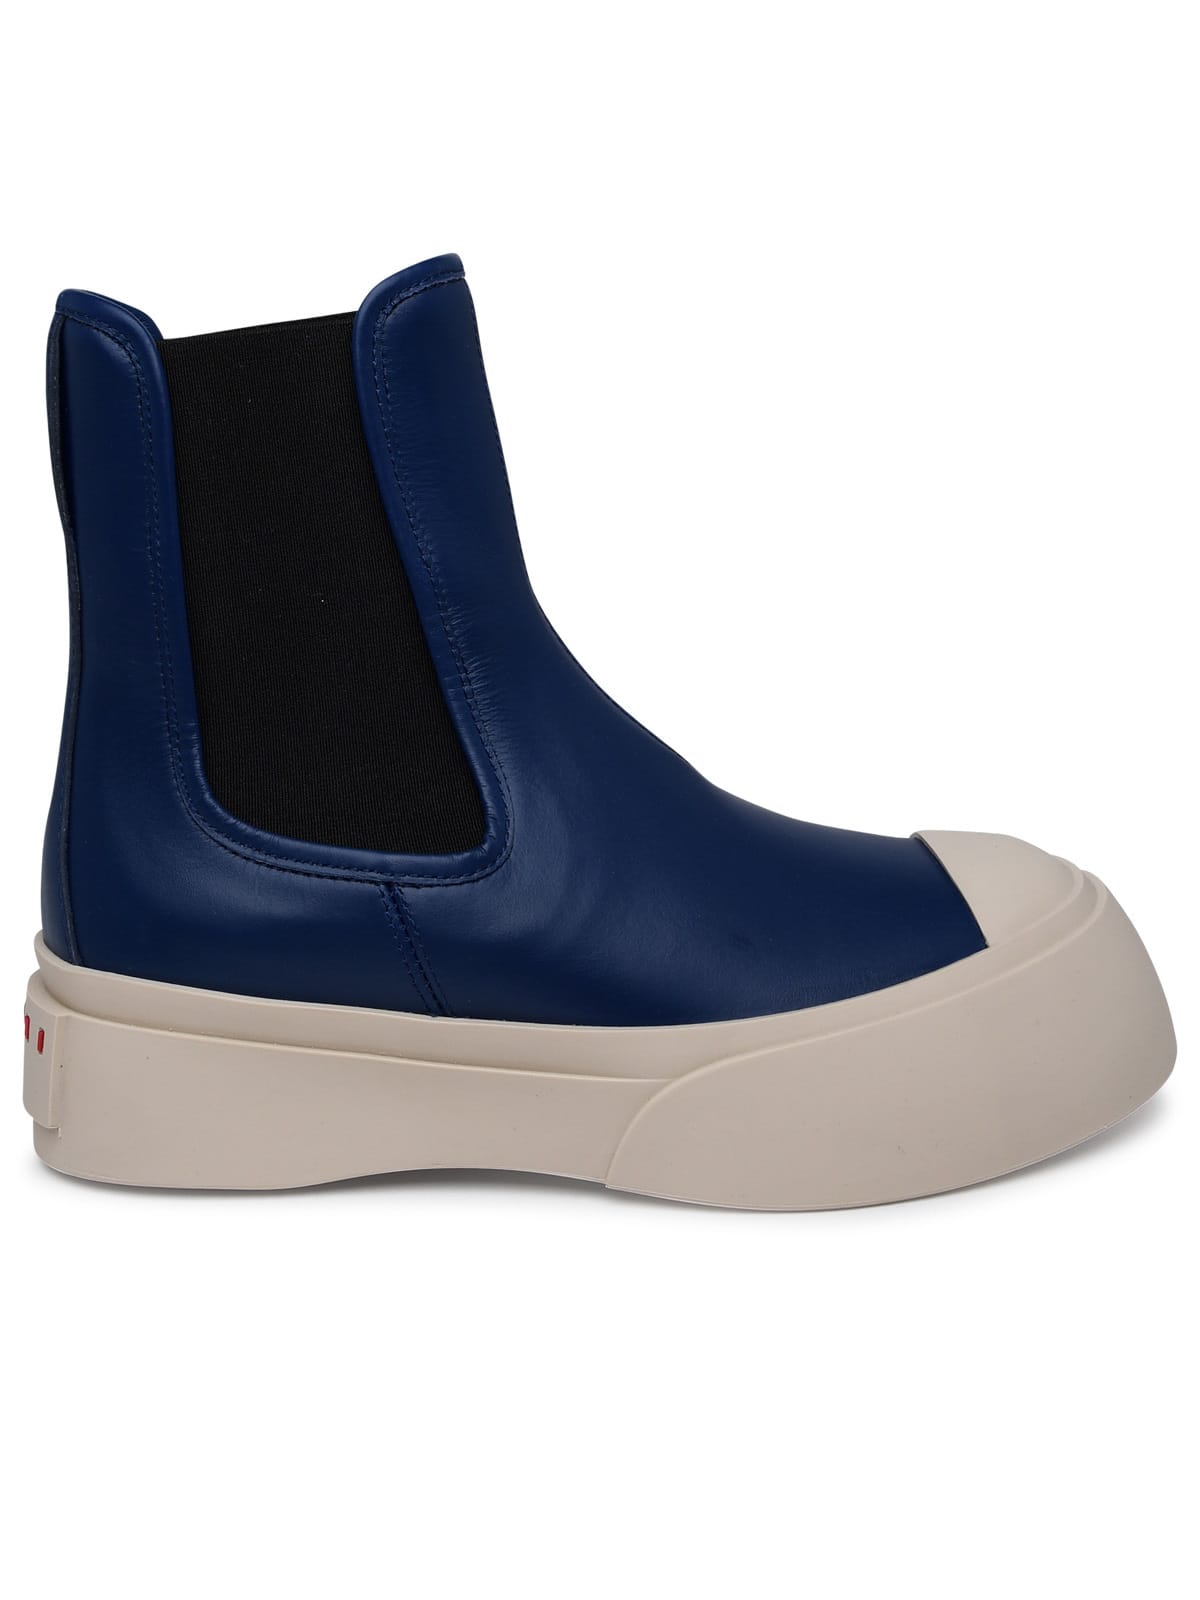 pablo Blue Nappa Leather Ankle Boots